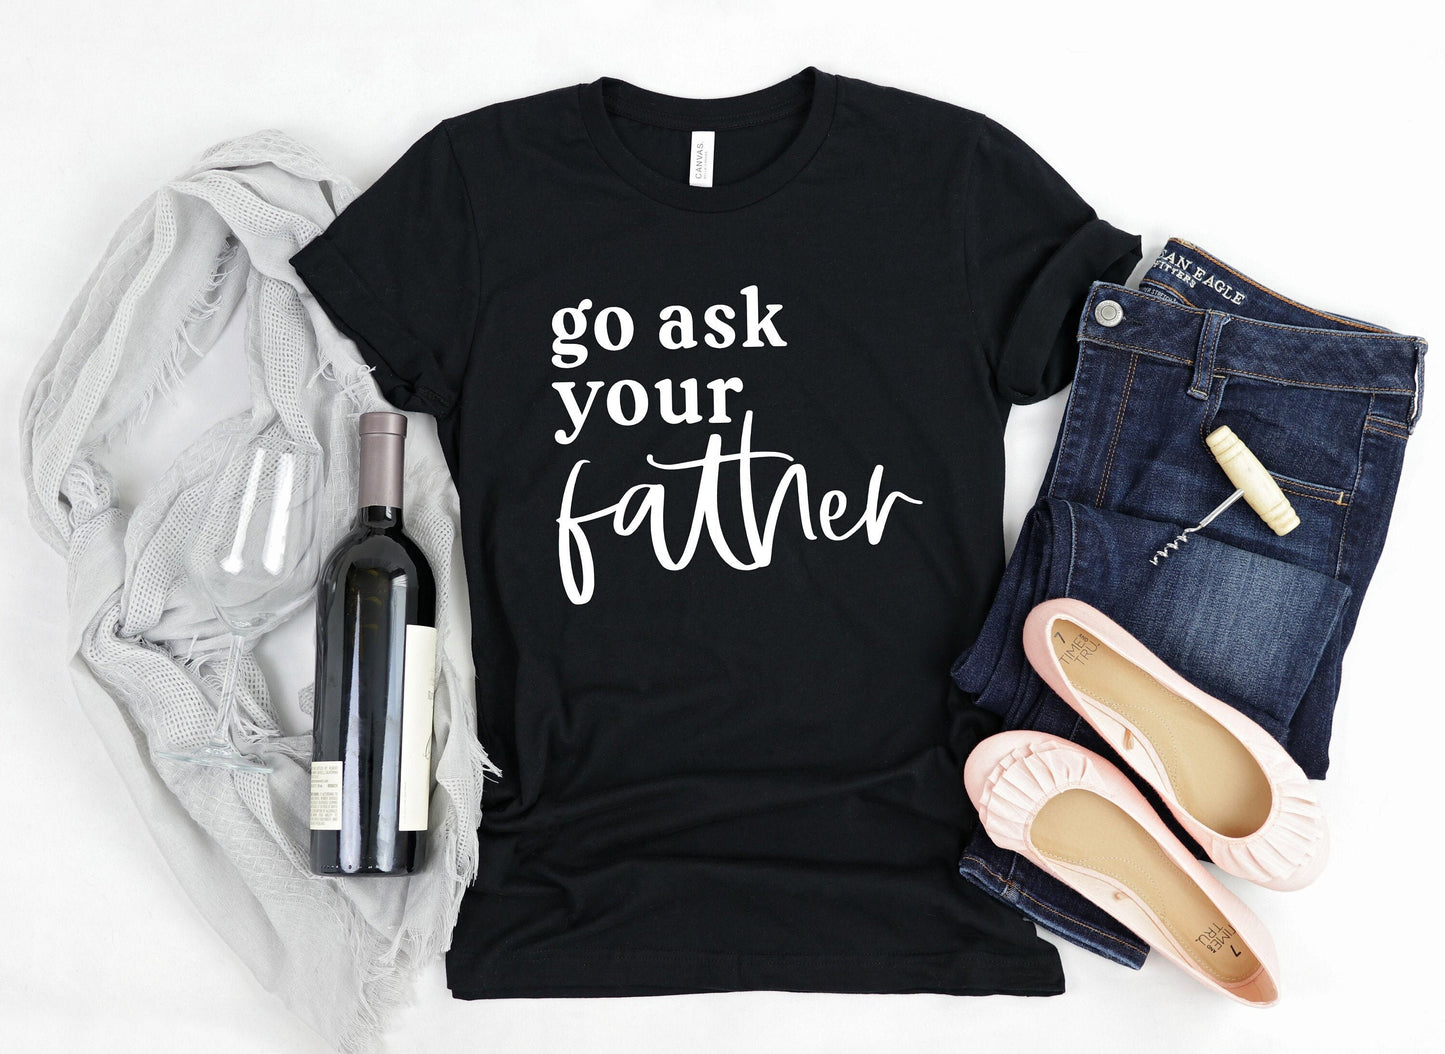 go ask your father tshirt • super soft tees for women • shirt for mom • ask your dad shirt • funny mom shirt